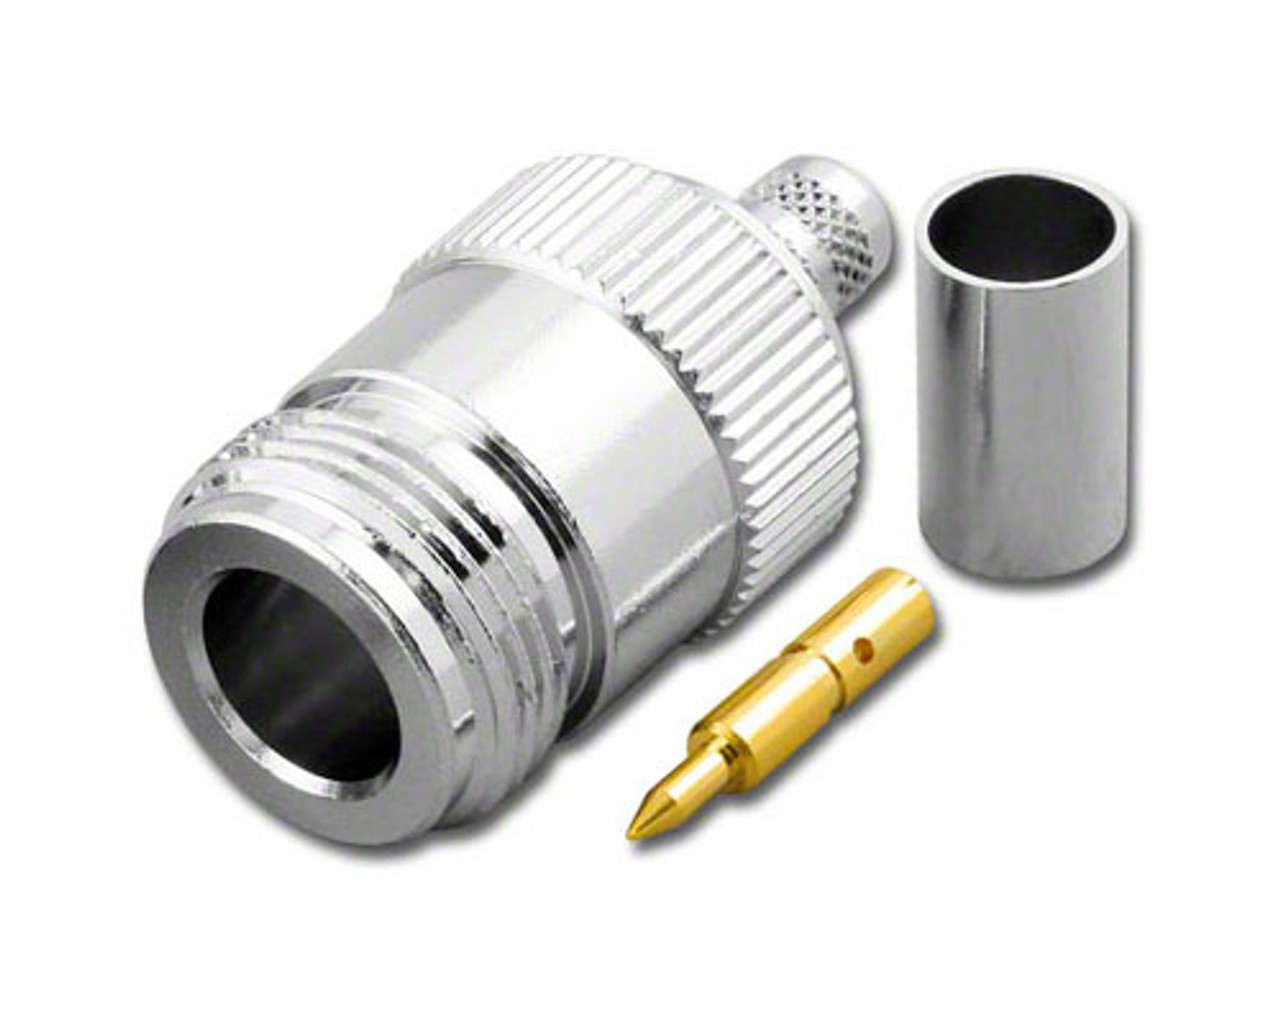 RP-N Female Jack Crimp Connector for LMR240 RG-8X Coaxial Cable